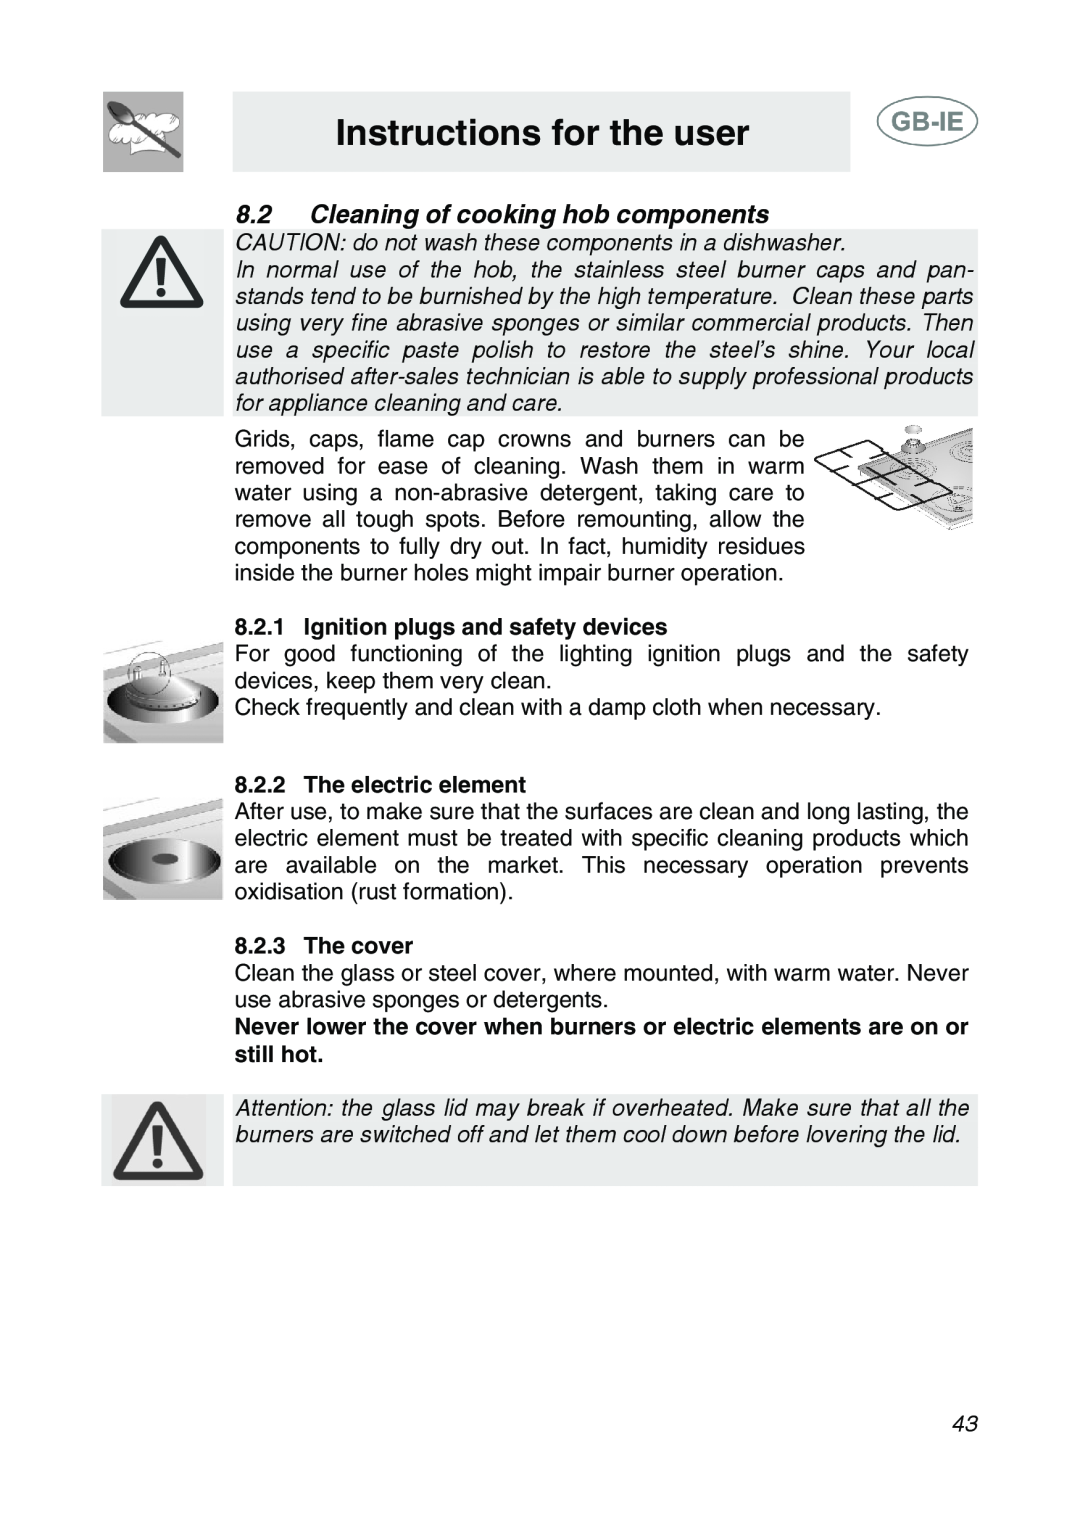 Smeg AP64S3 manual Cleaning of cooking hob components, Ignition plugs and safety devices, The electric element, The cover 